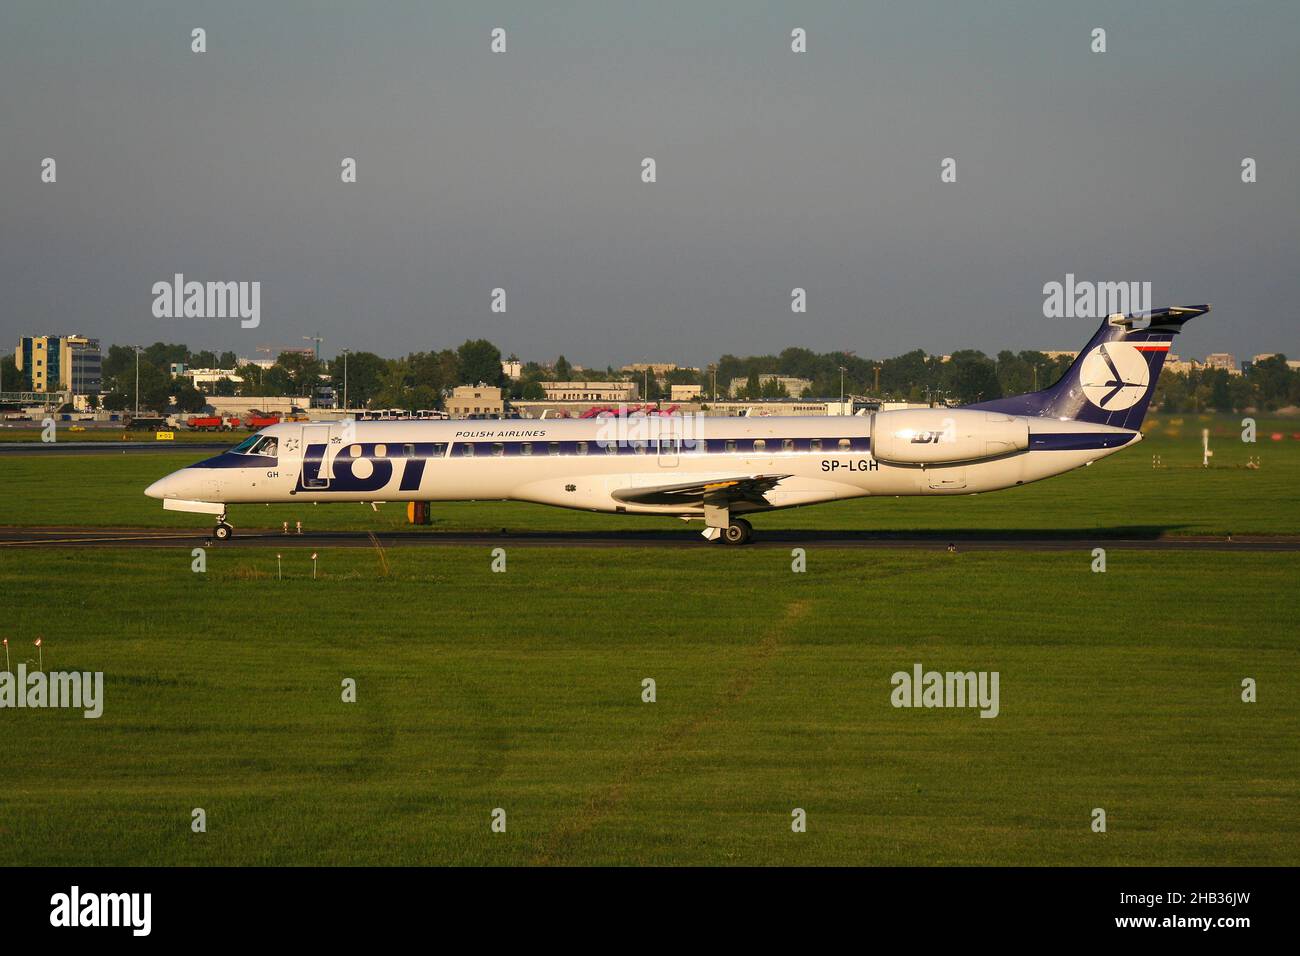 Warsaw, Poland - 07 august 2008: Side view of polish airlines Lot jet airplane Embraer ERJ-145MP taxiing on taxiway to the runway Stock Photo